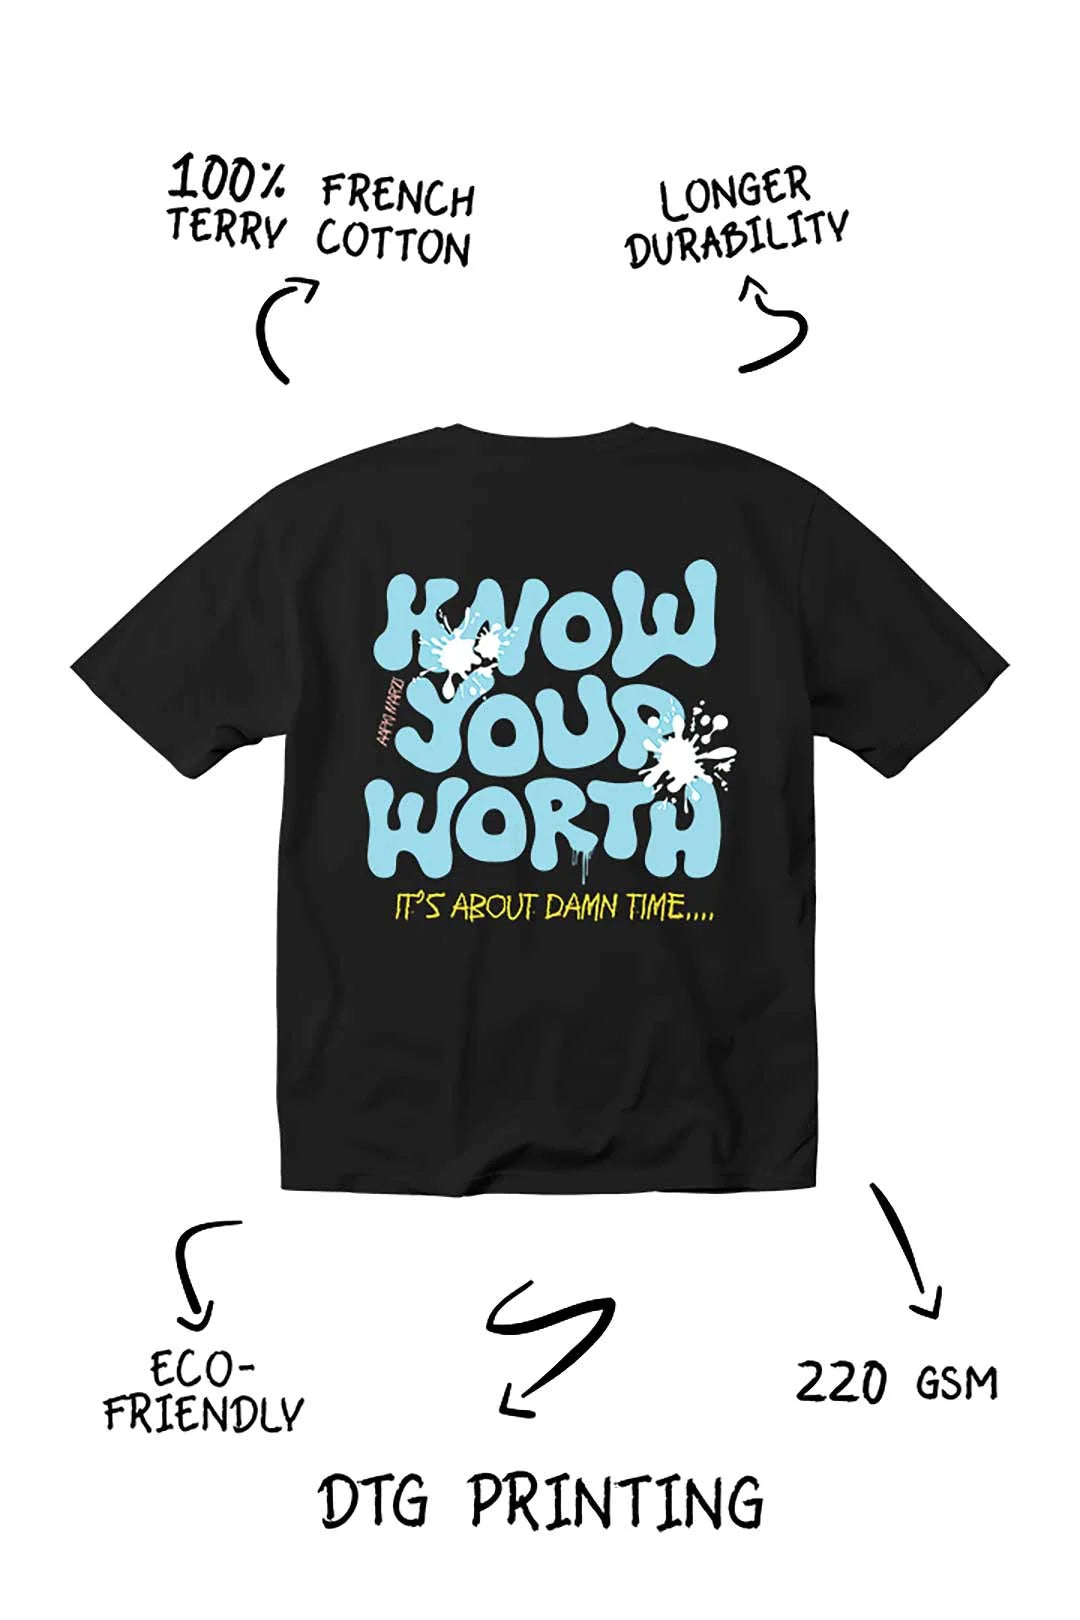 know your worth oversized t-shirt